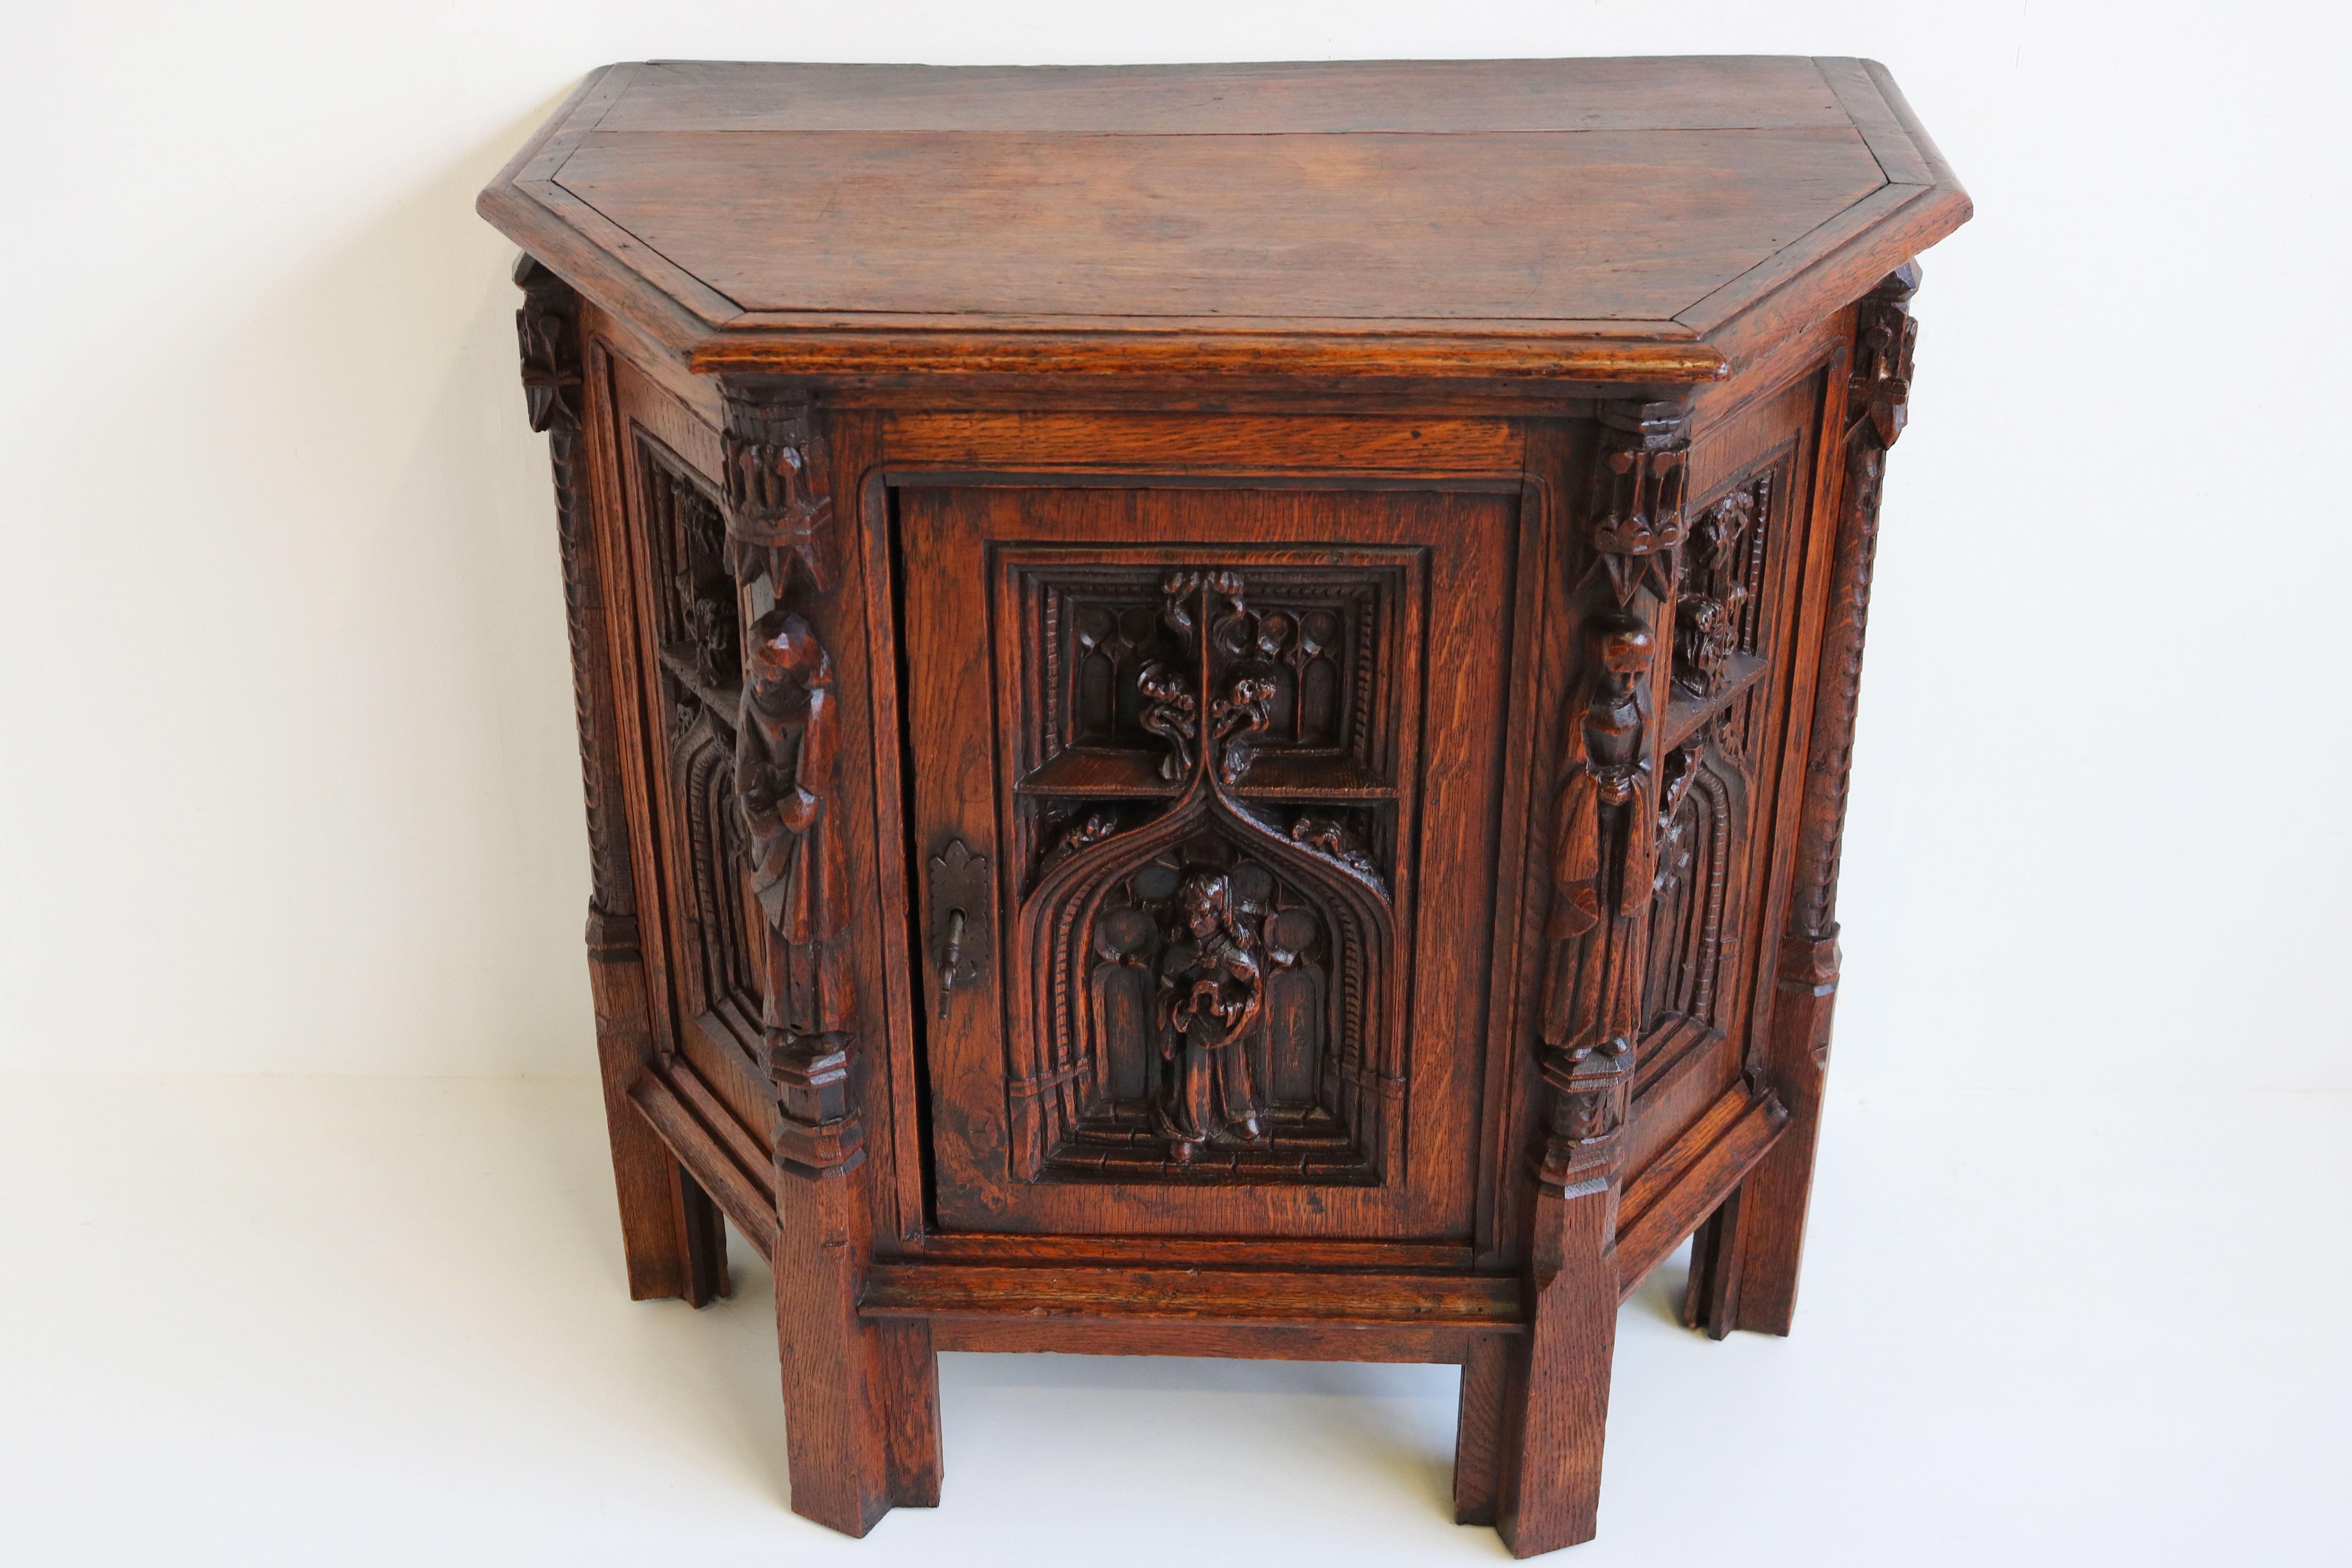 Small Antique Gothic Revival Hexagonal Cabinet 19th Century French Oak Figures 1